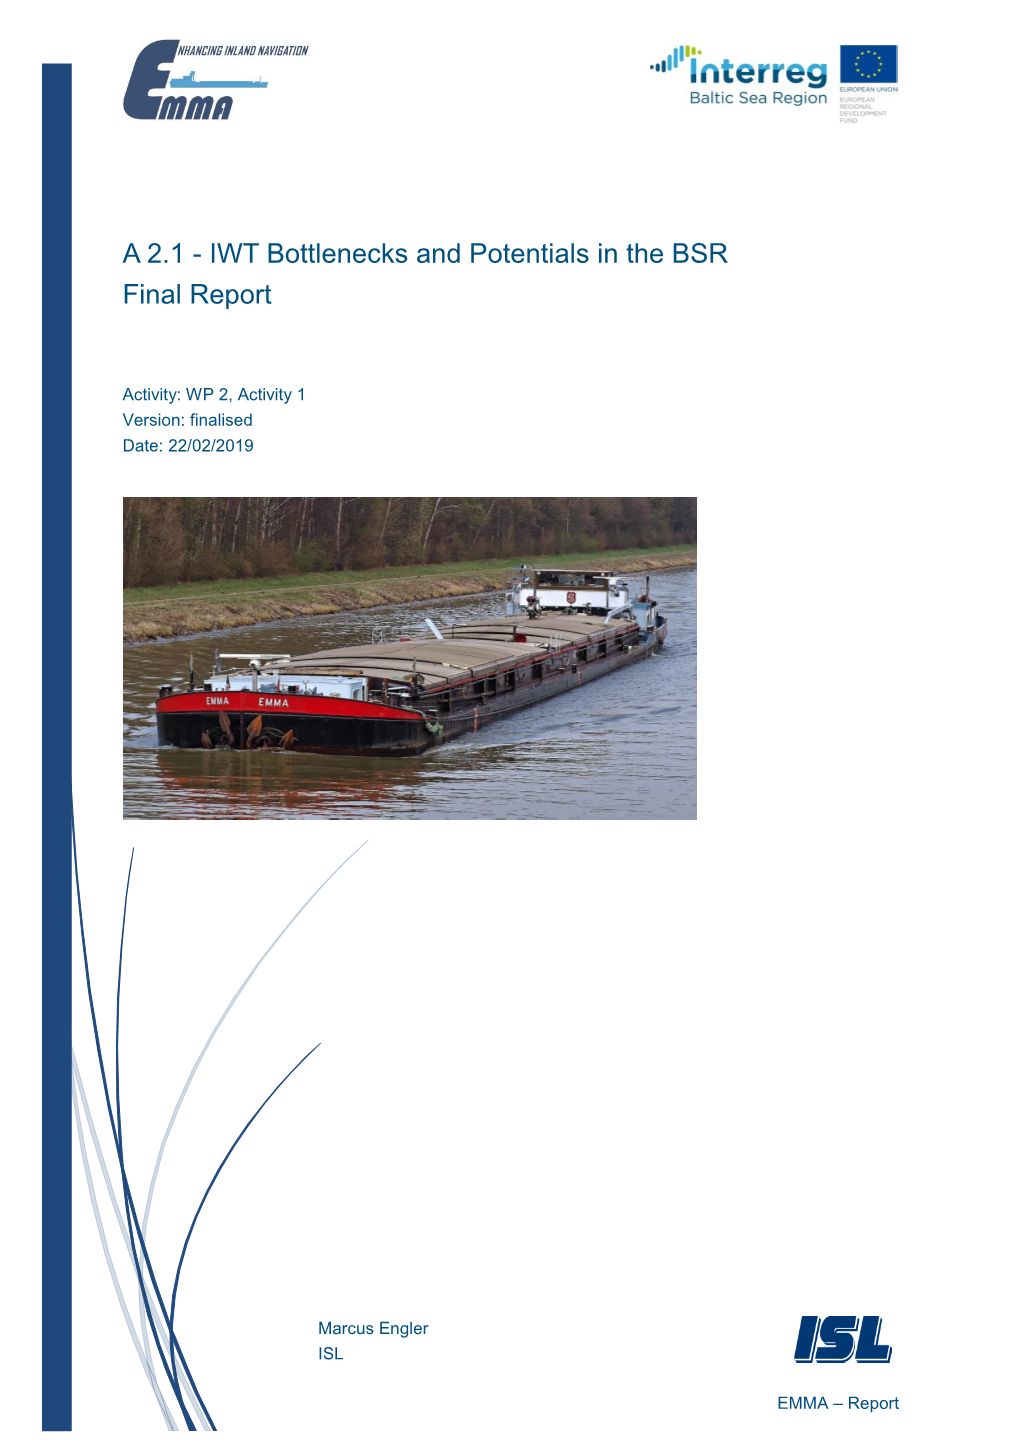 A 2.1 - IWT Bottlenecks and Potentials in the BSR Final Report